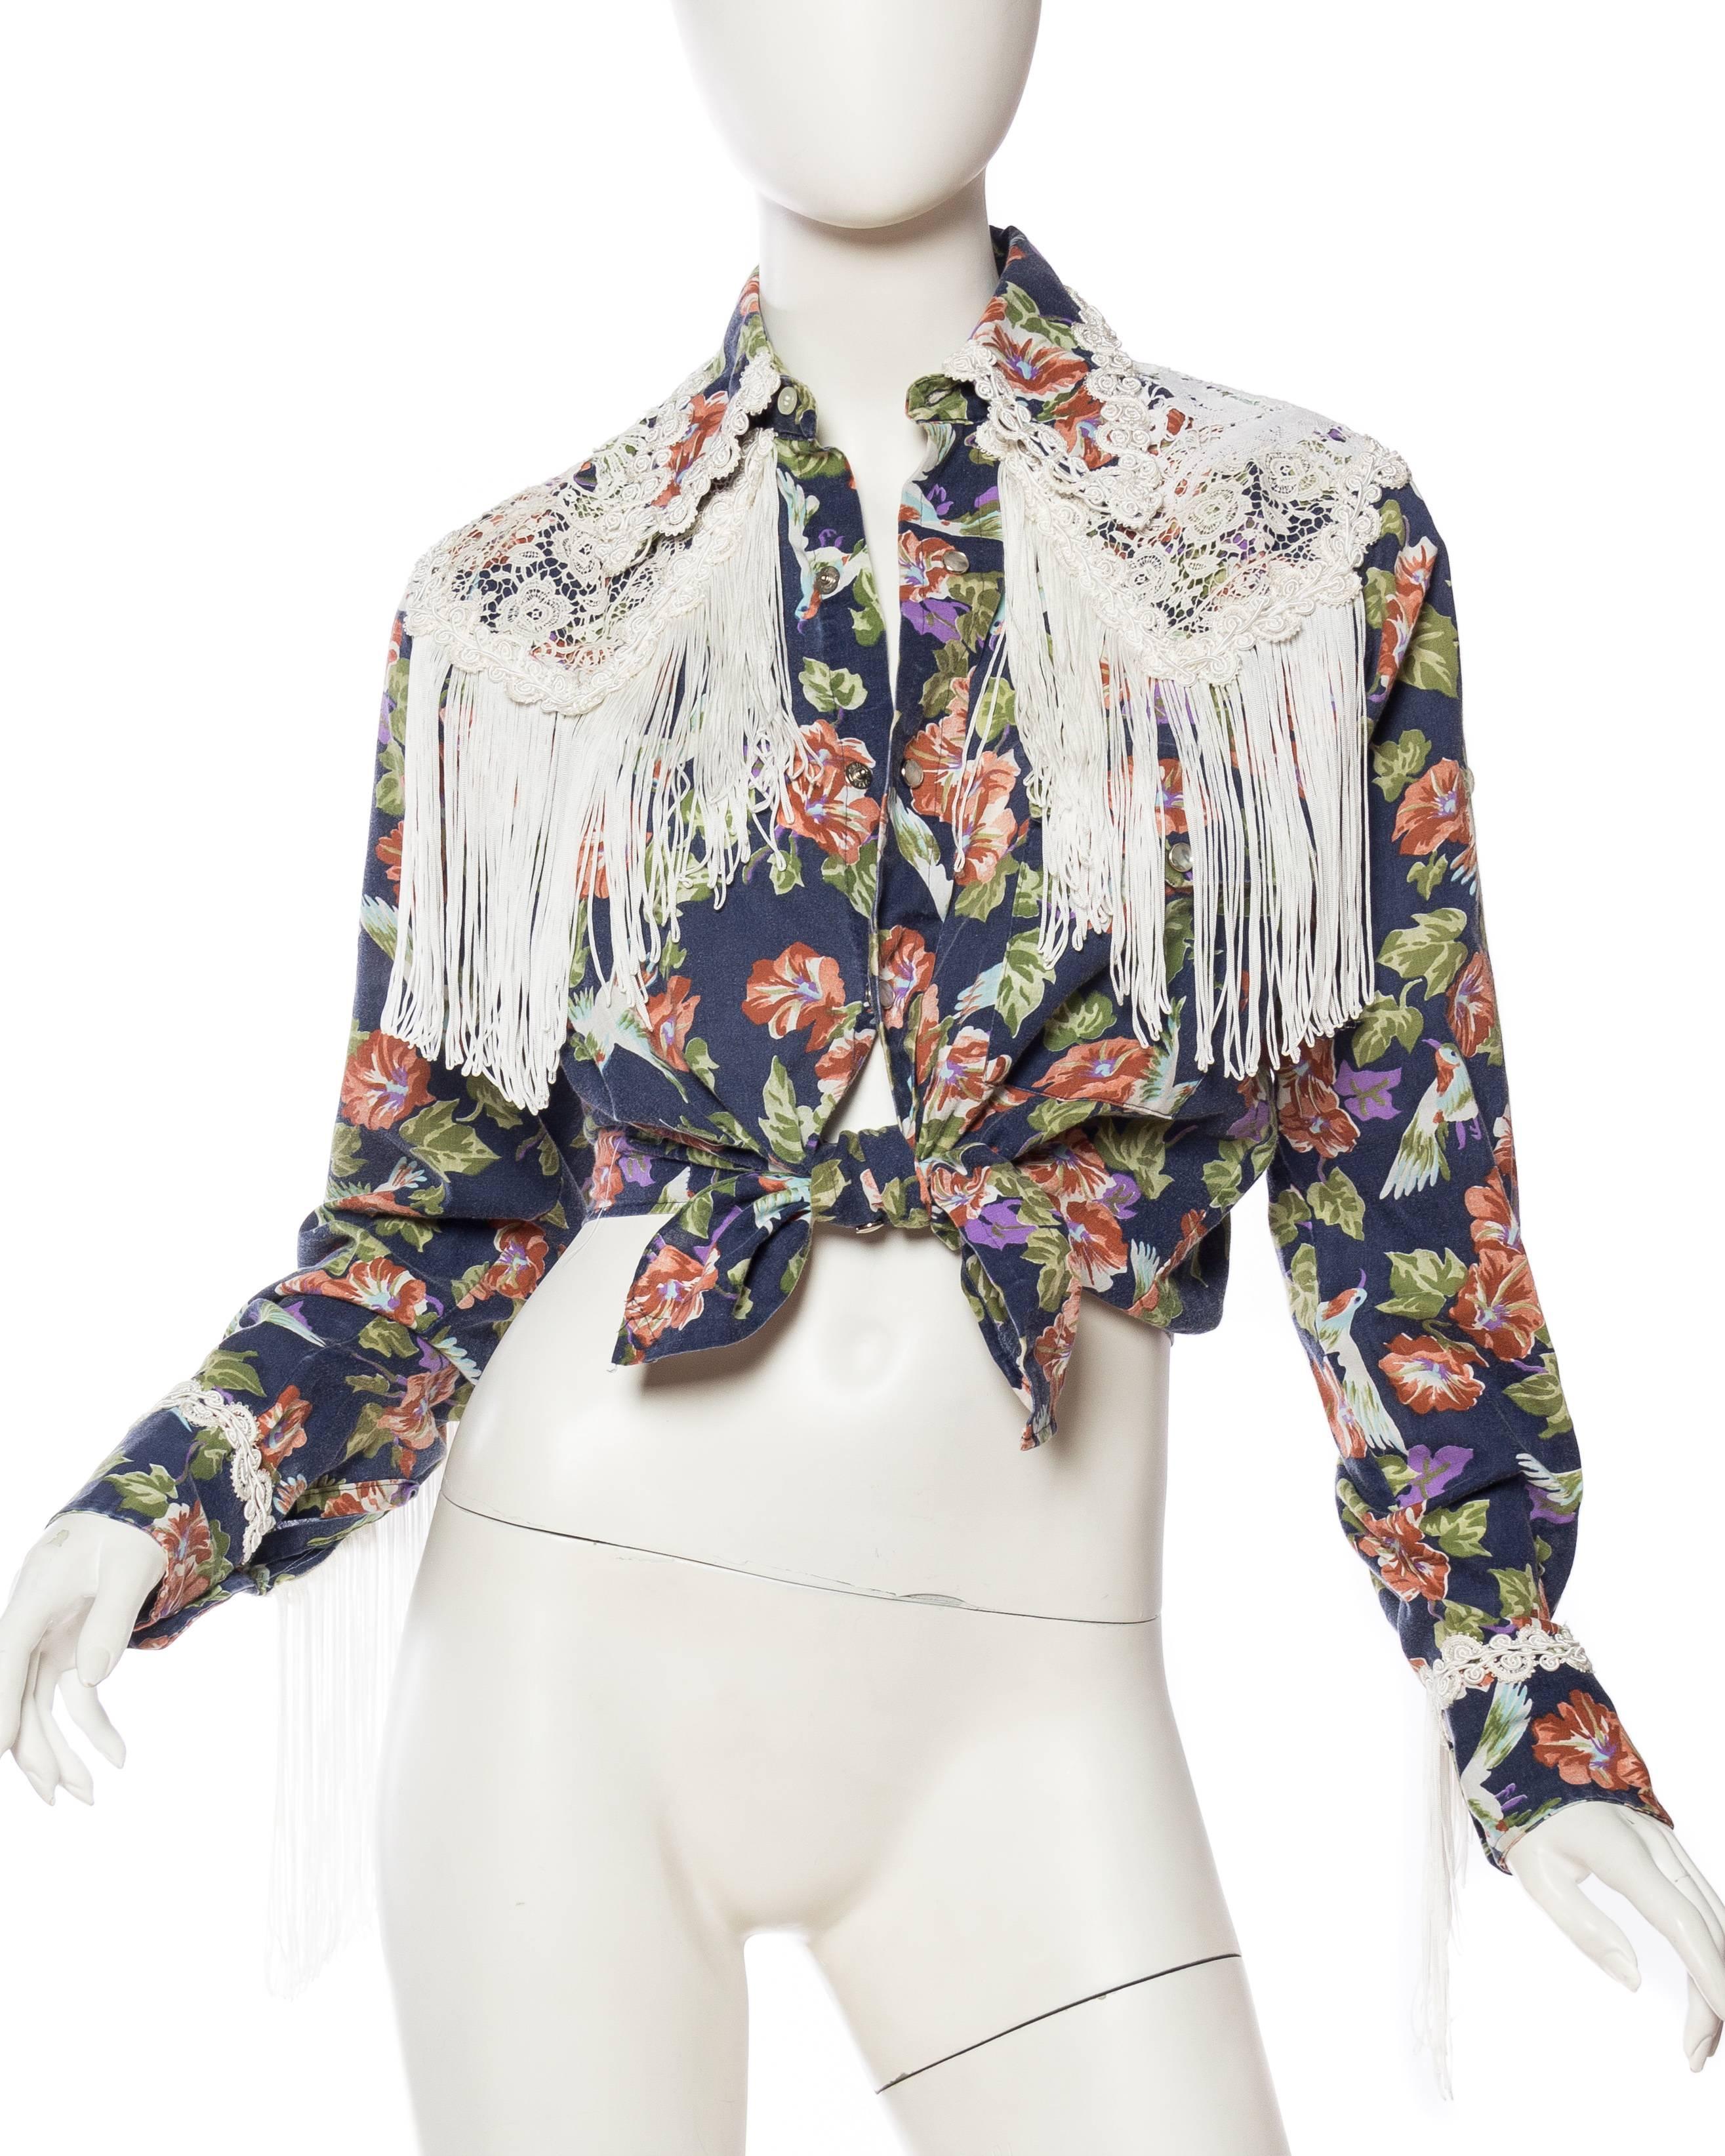 Gray Floral Western Shirt with Fringe and Victorian Lace